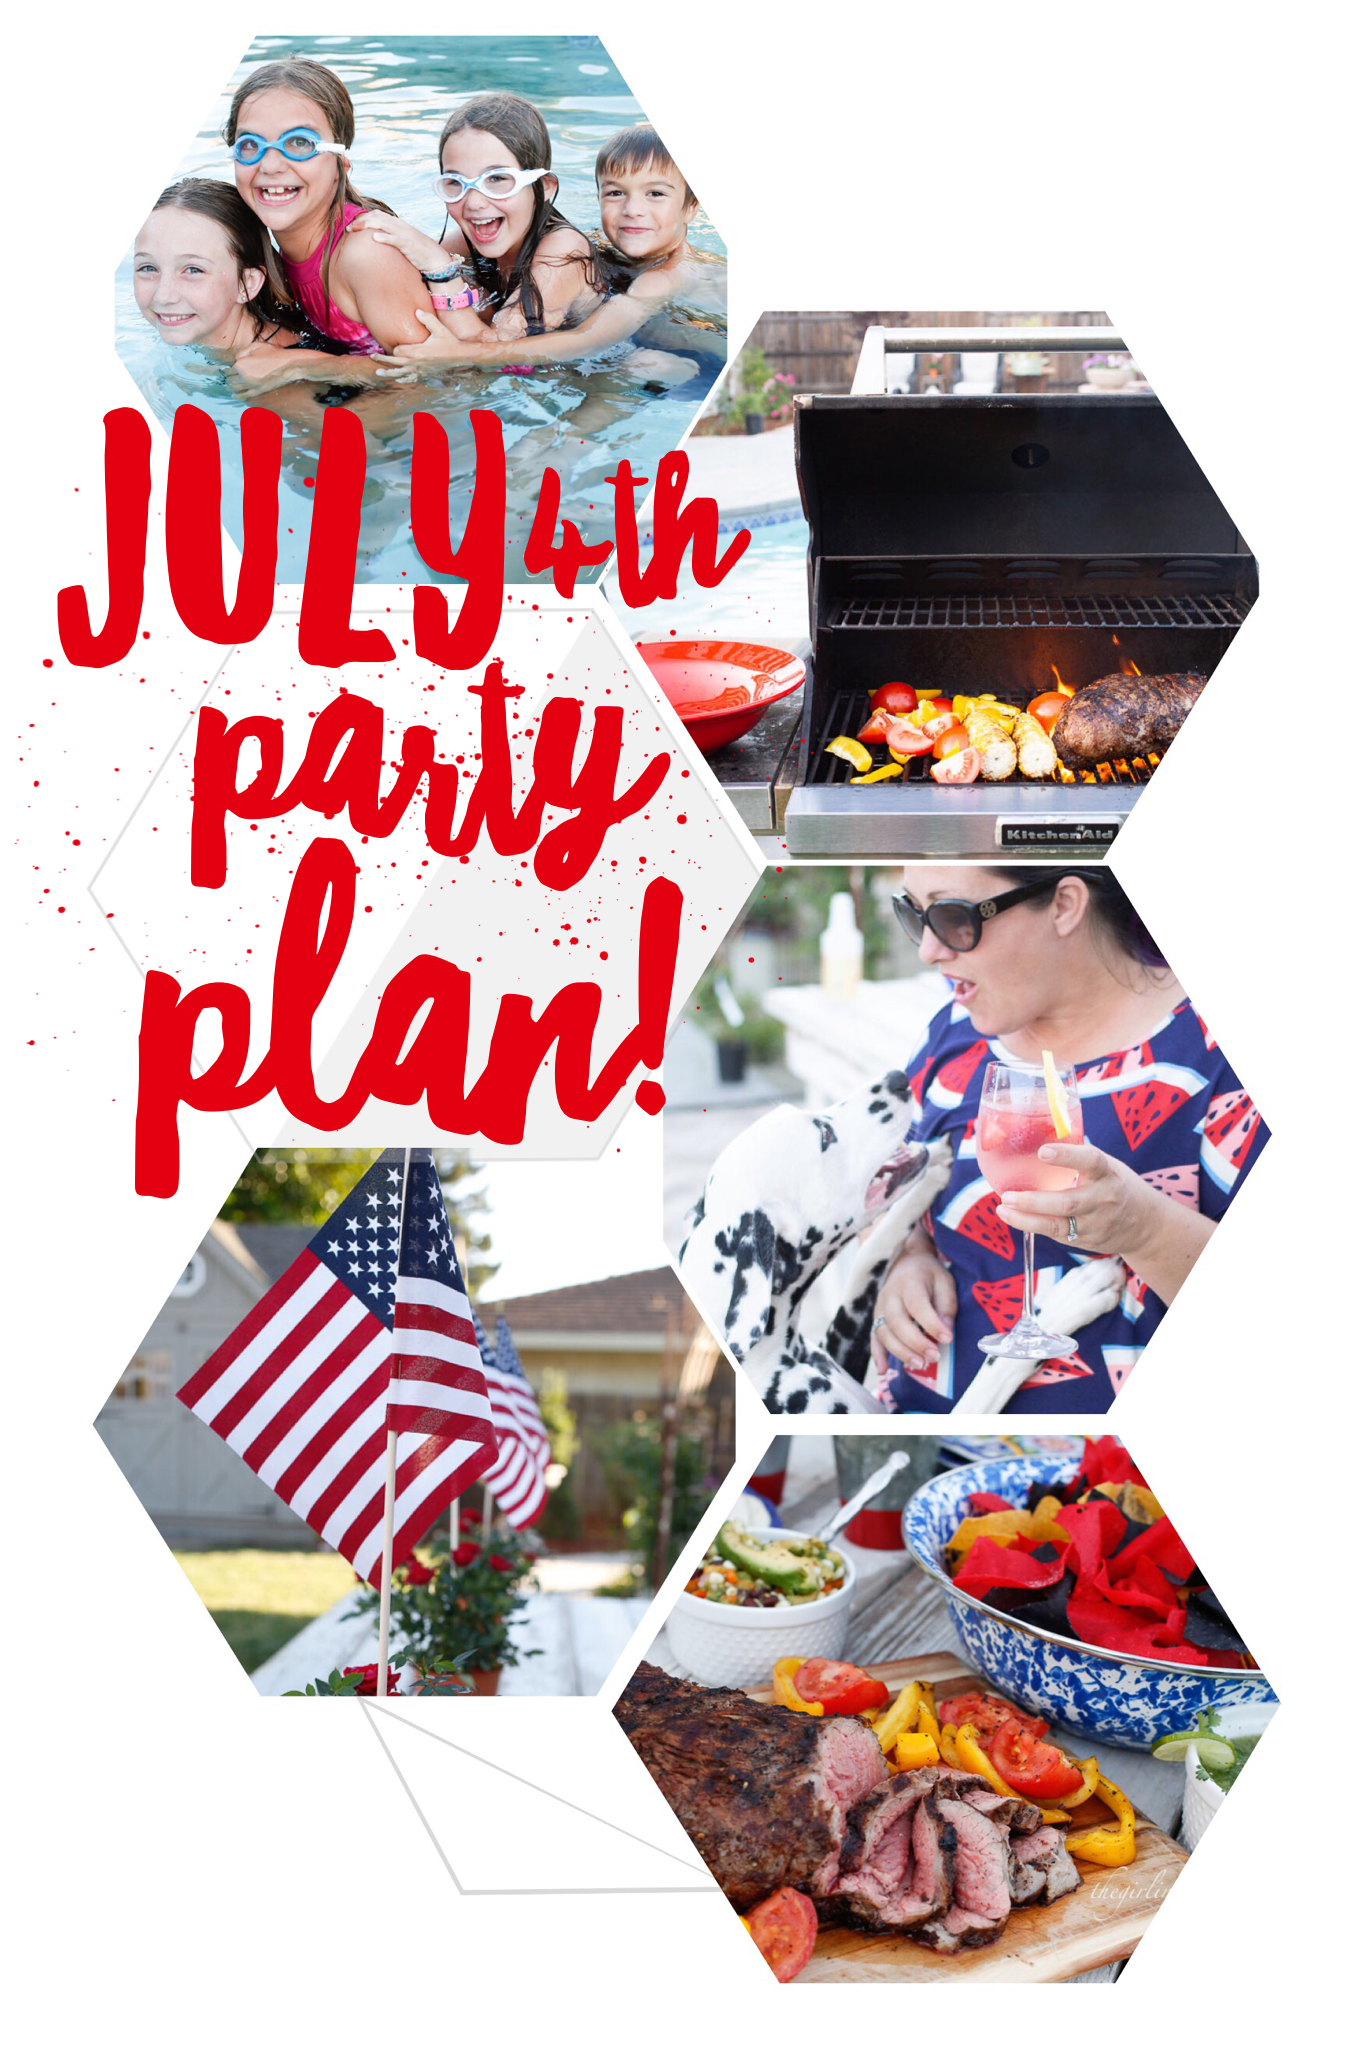 Fourth of July grilling menu and party plan!